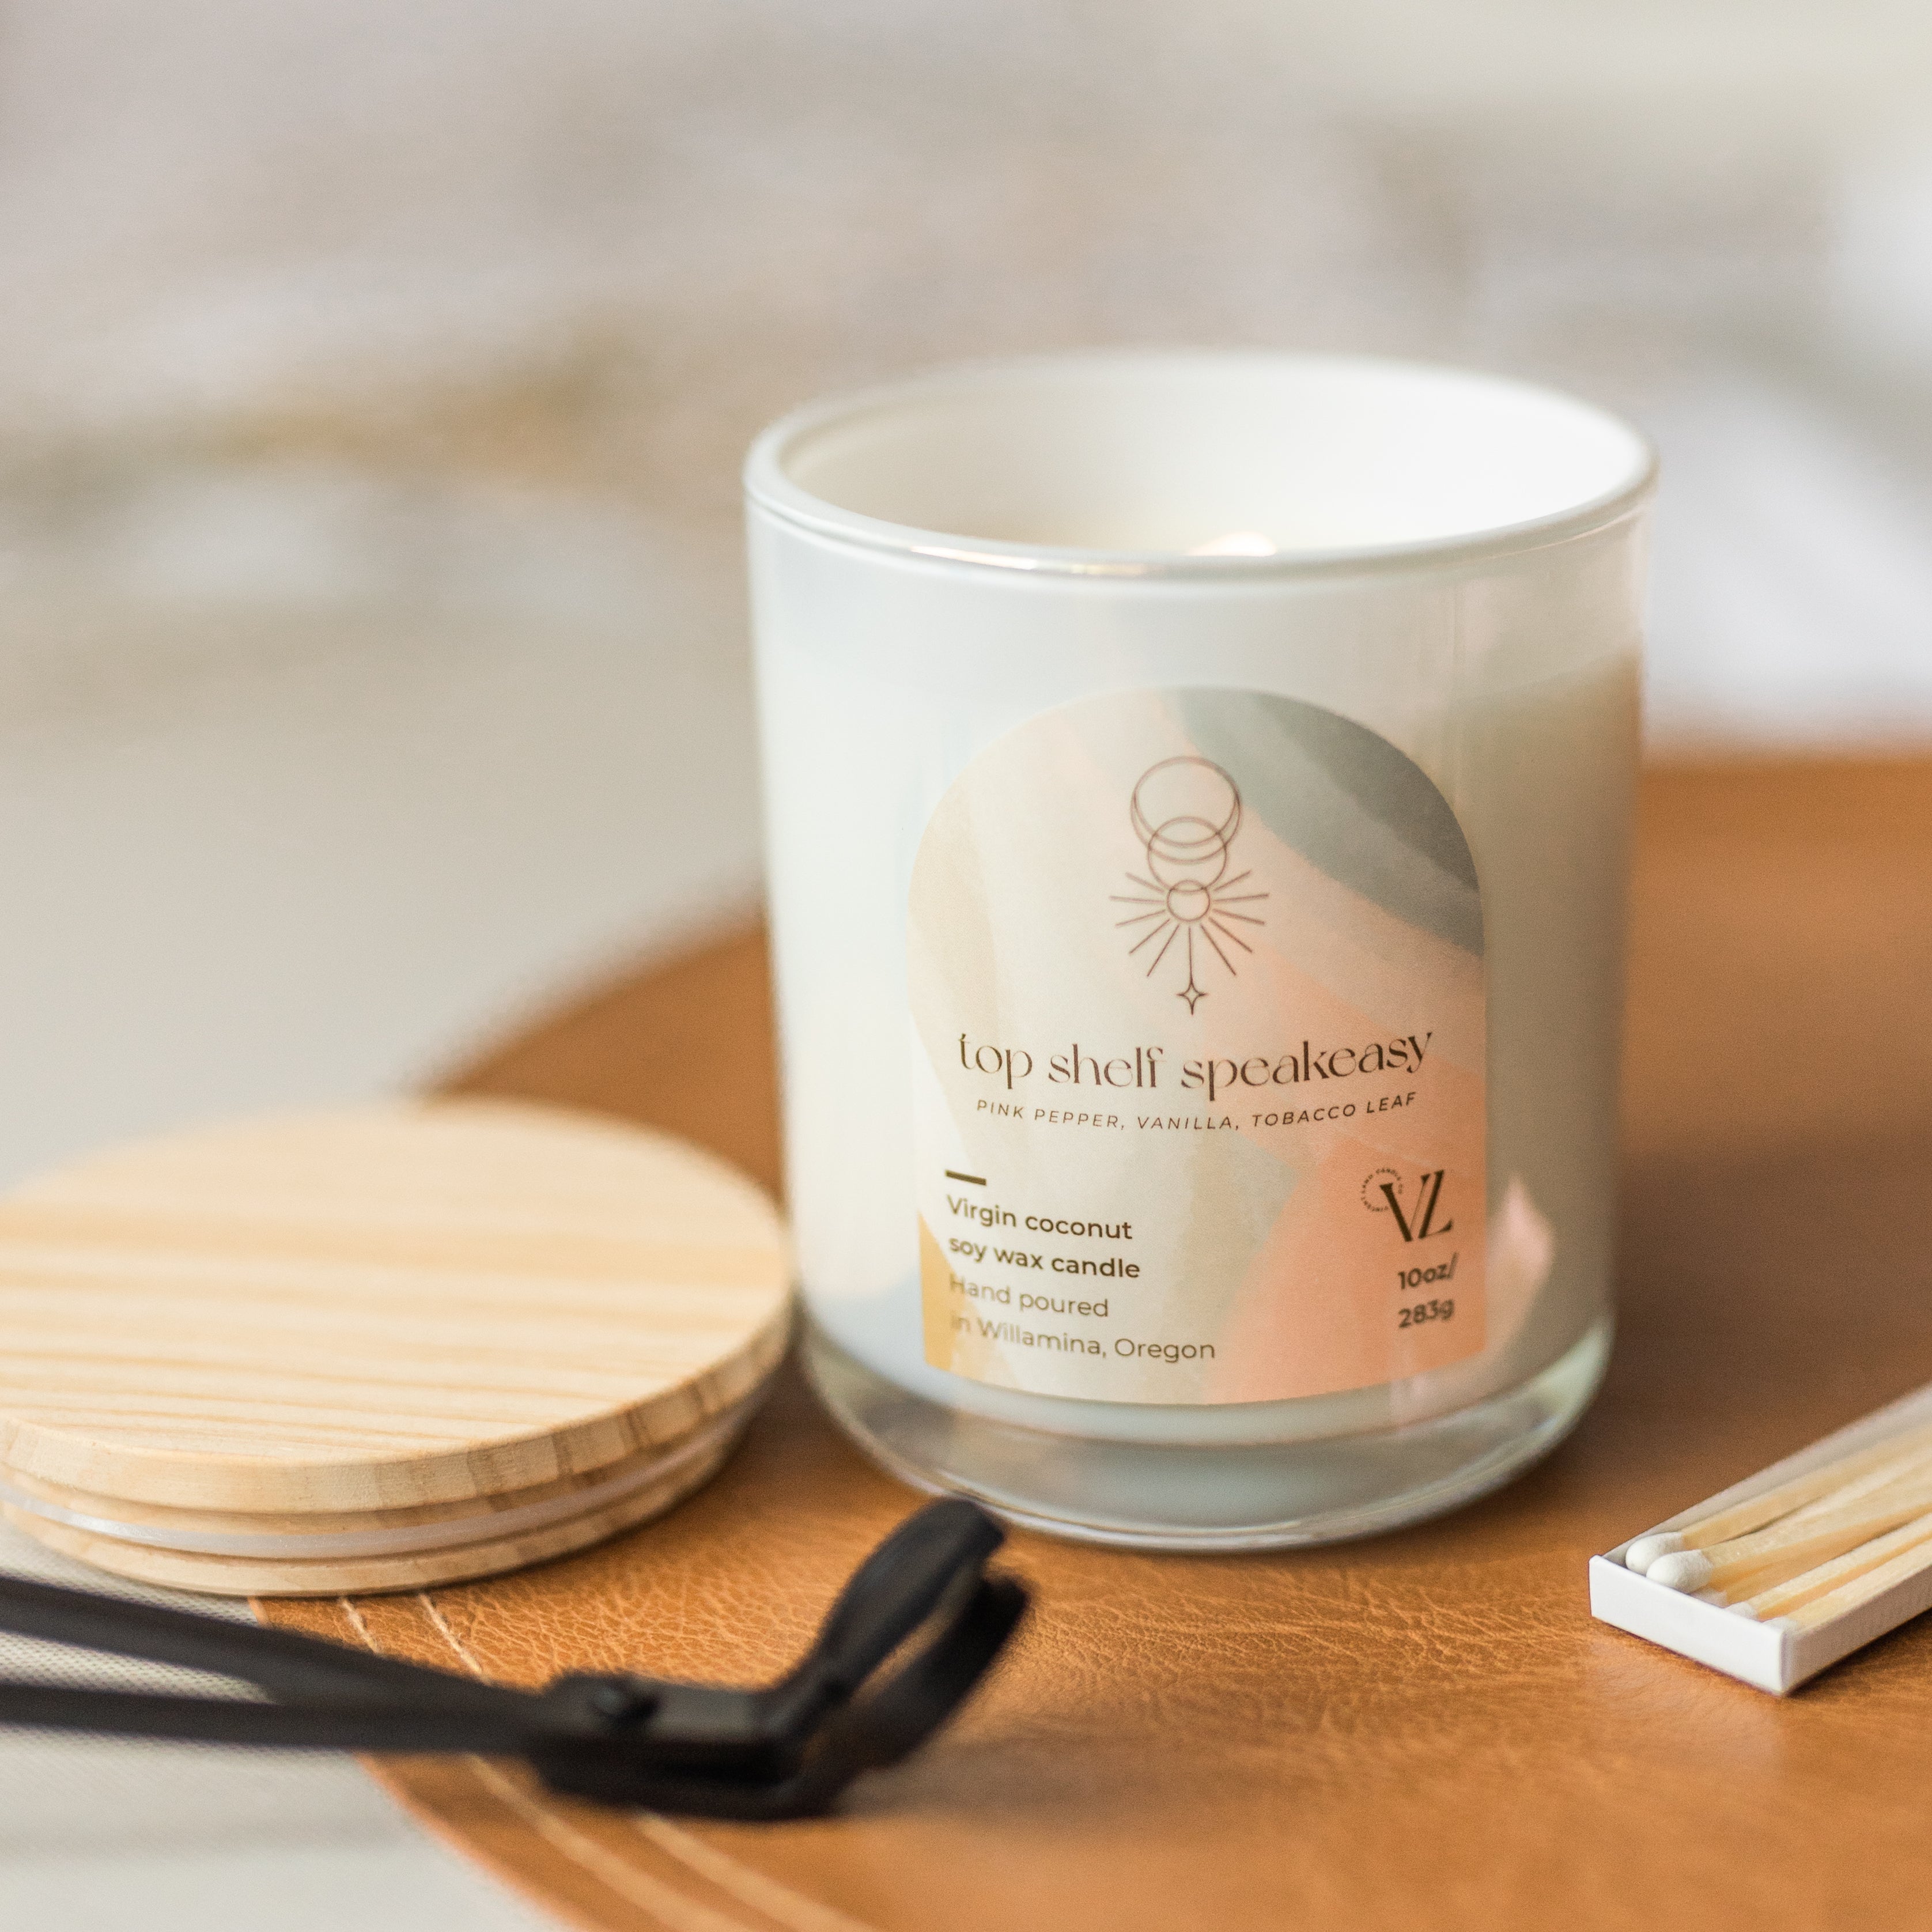 Top shelf speakeasy coconut soy wax candle I pink pepper, vanilla, tobacco leaf - Vincent Land Candle Co.